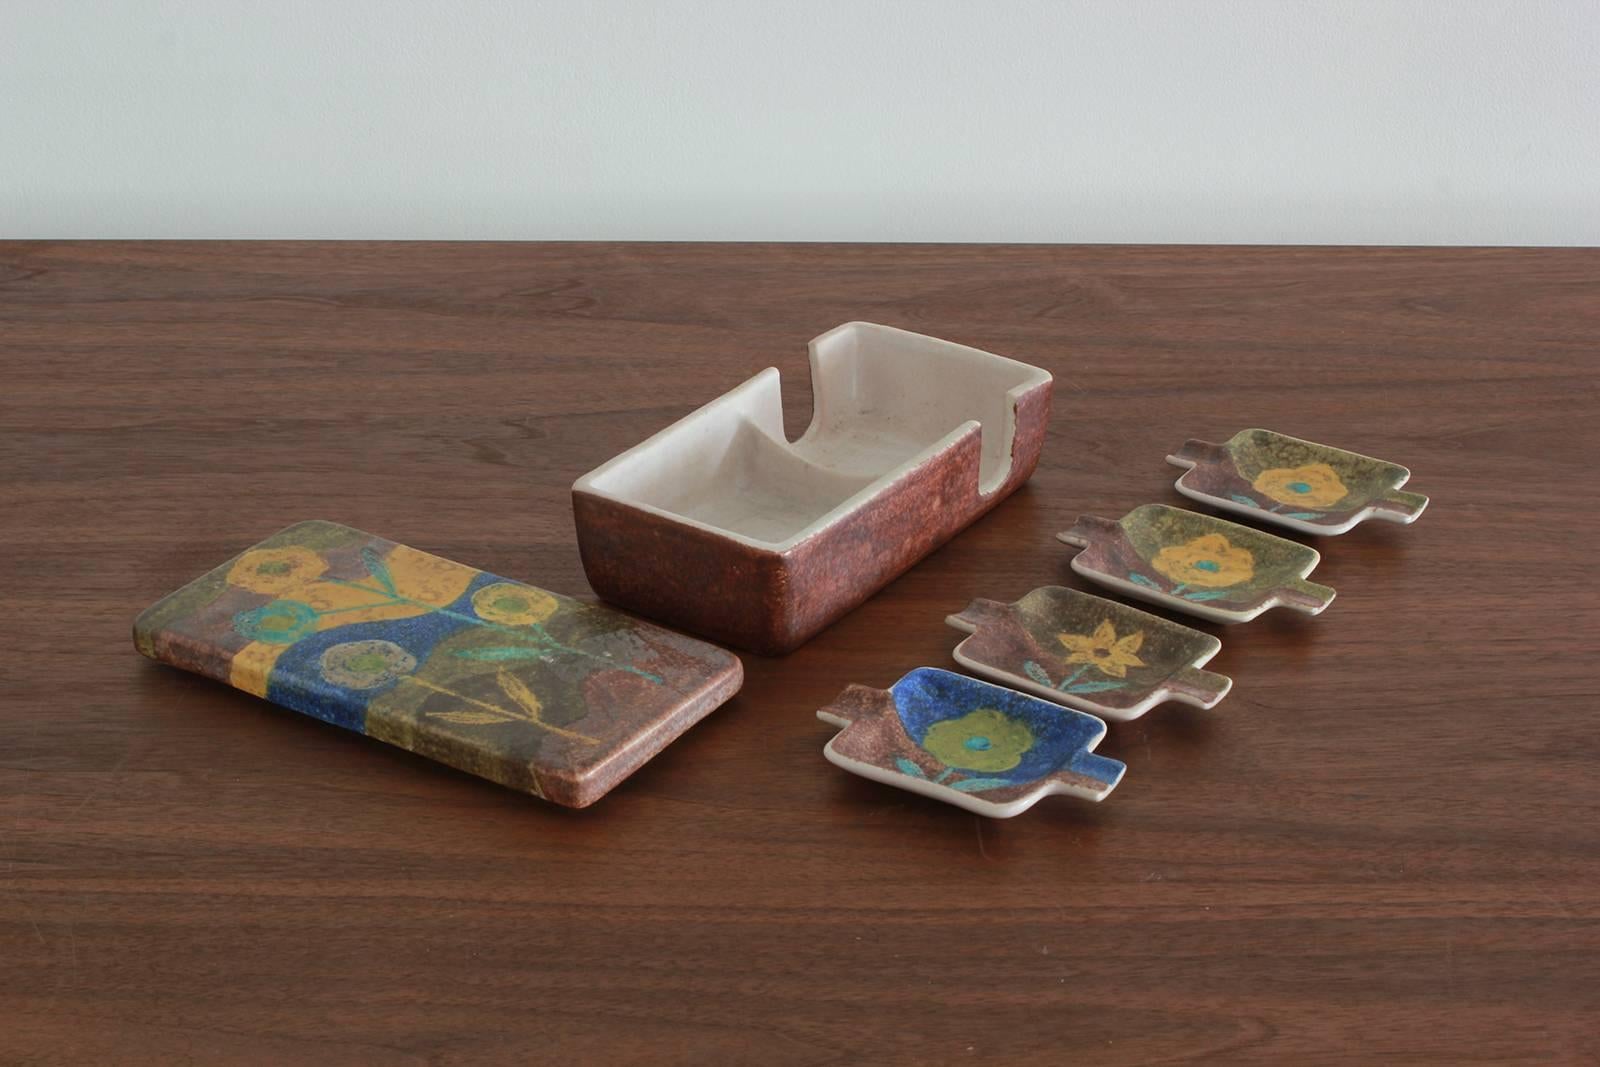 Signed Raymor Italian smoking set with four ashtrays and cigarette box. Vintage mid-century signed Raymor Italy pottery, floral motif, smoker set with ashtrays and cigarette box.



Approximately: 8